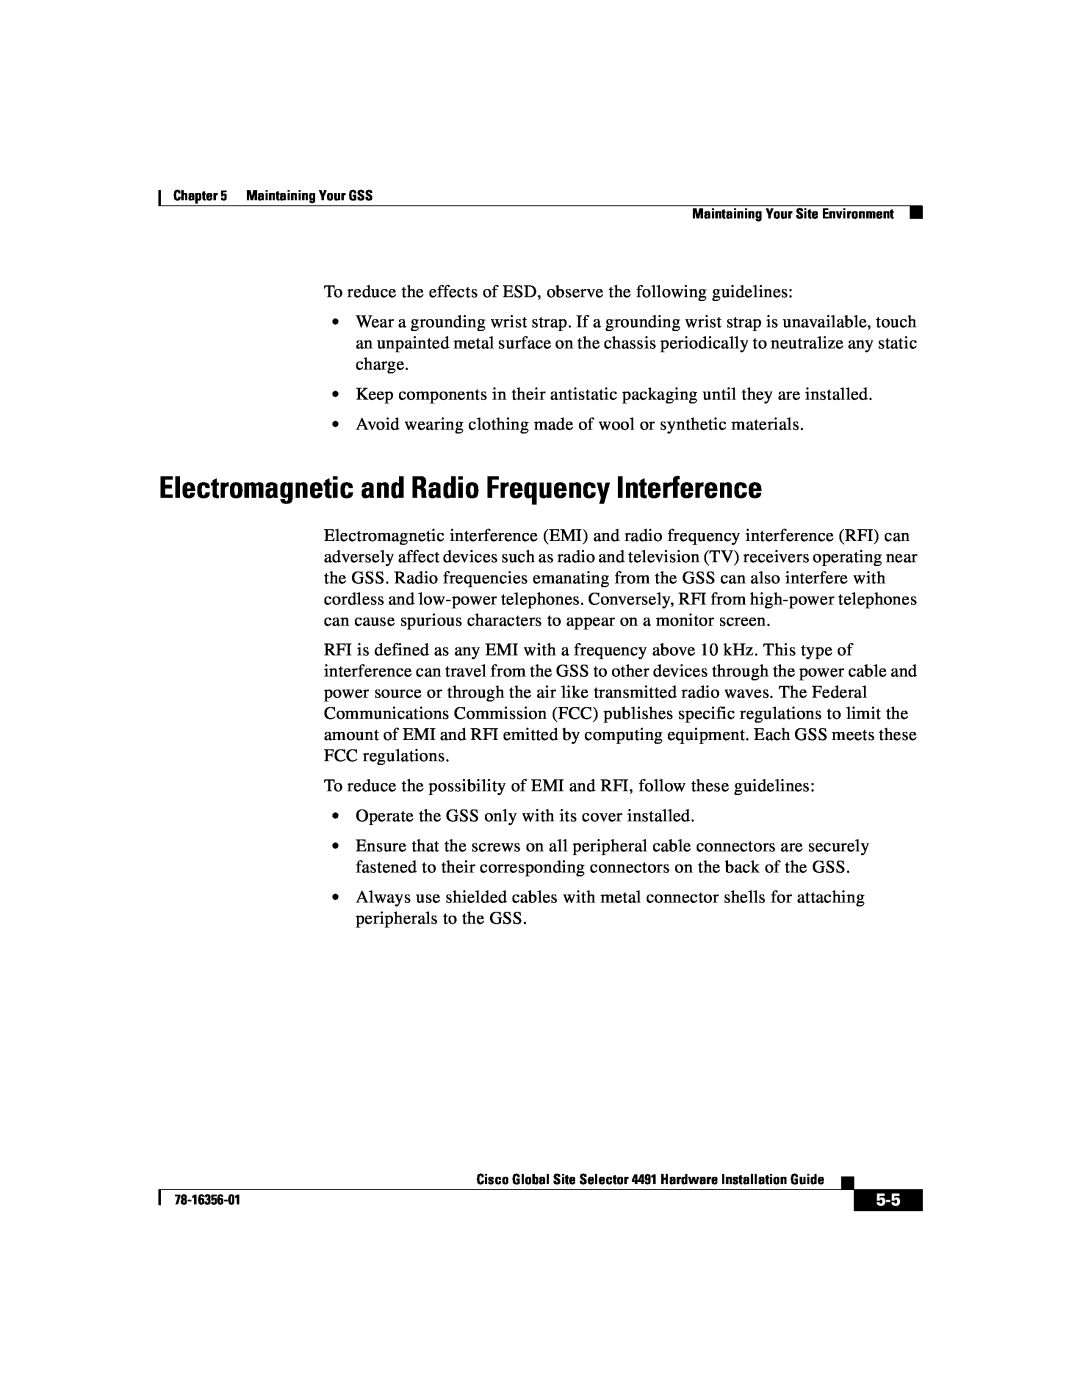 Cisco Systems 78-16356-01 manual Electromagnetic and Radio Frequency Interference 